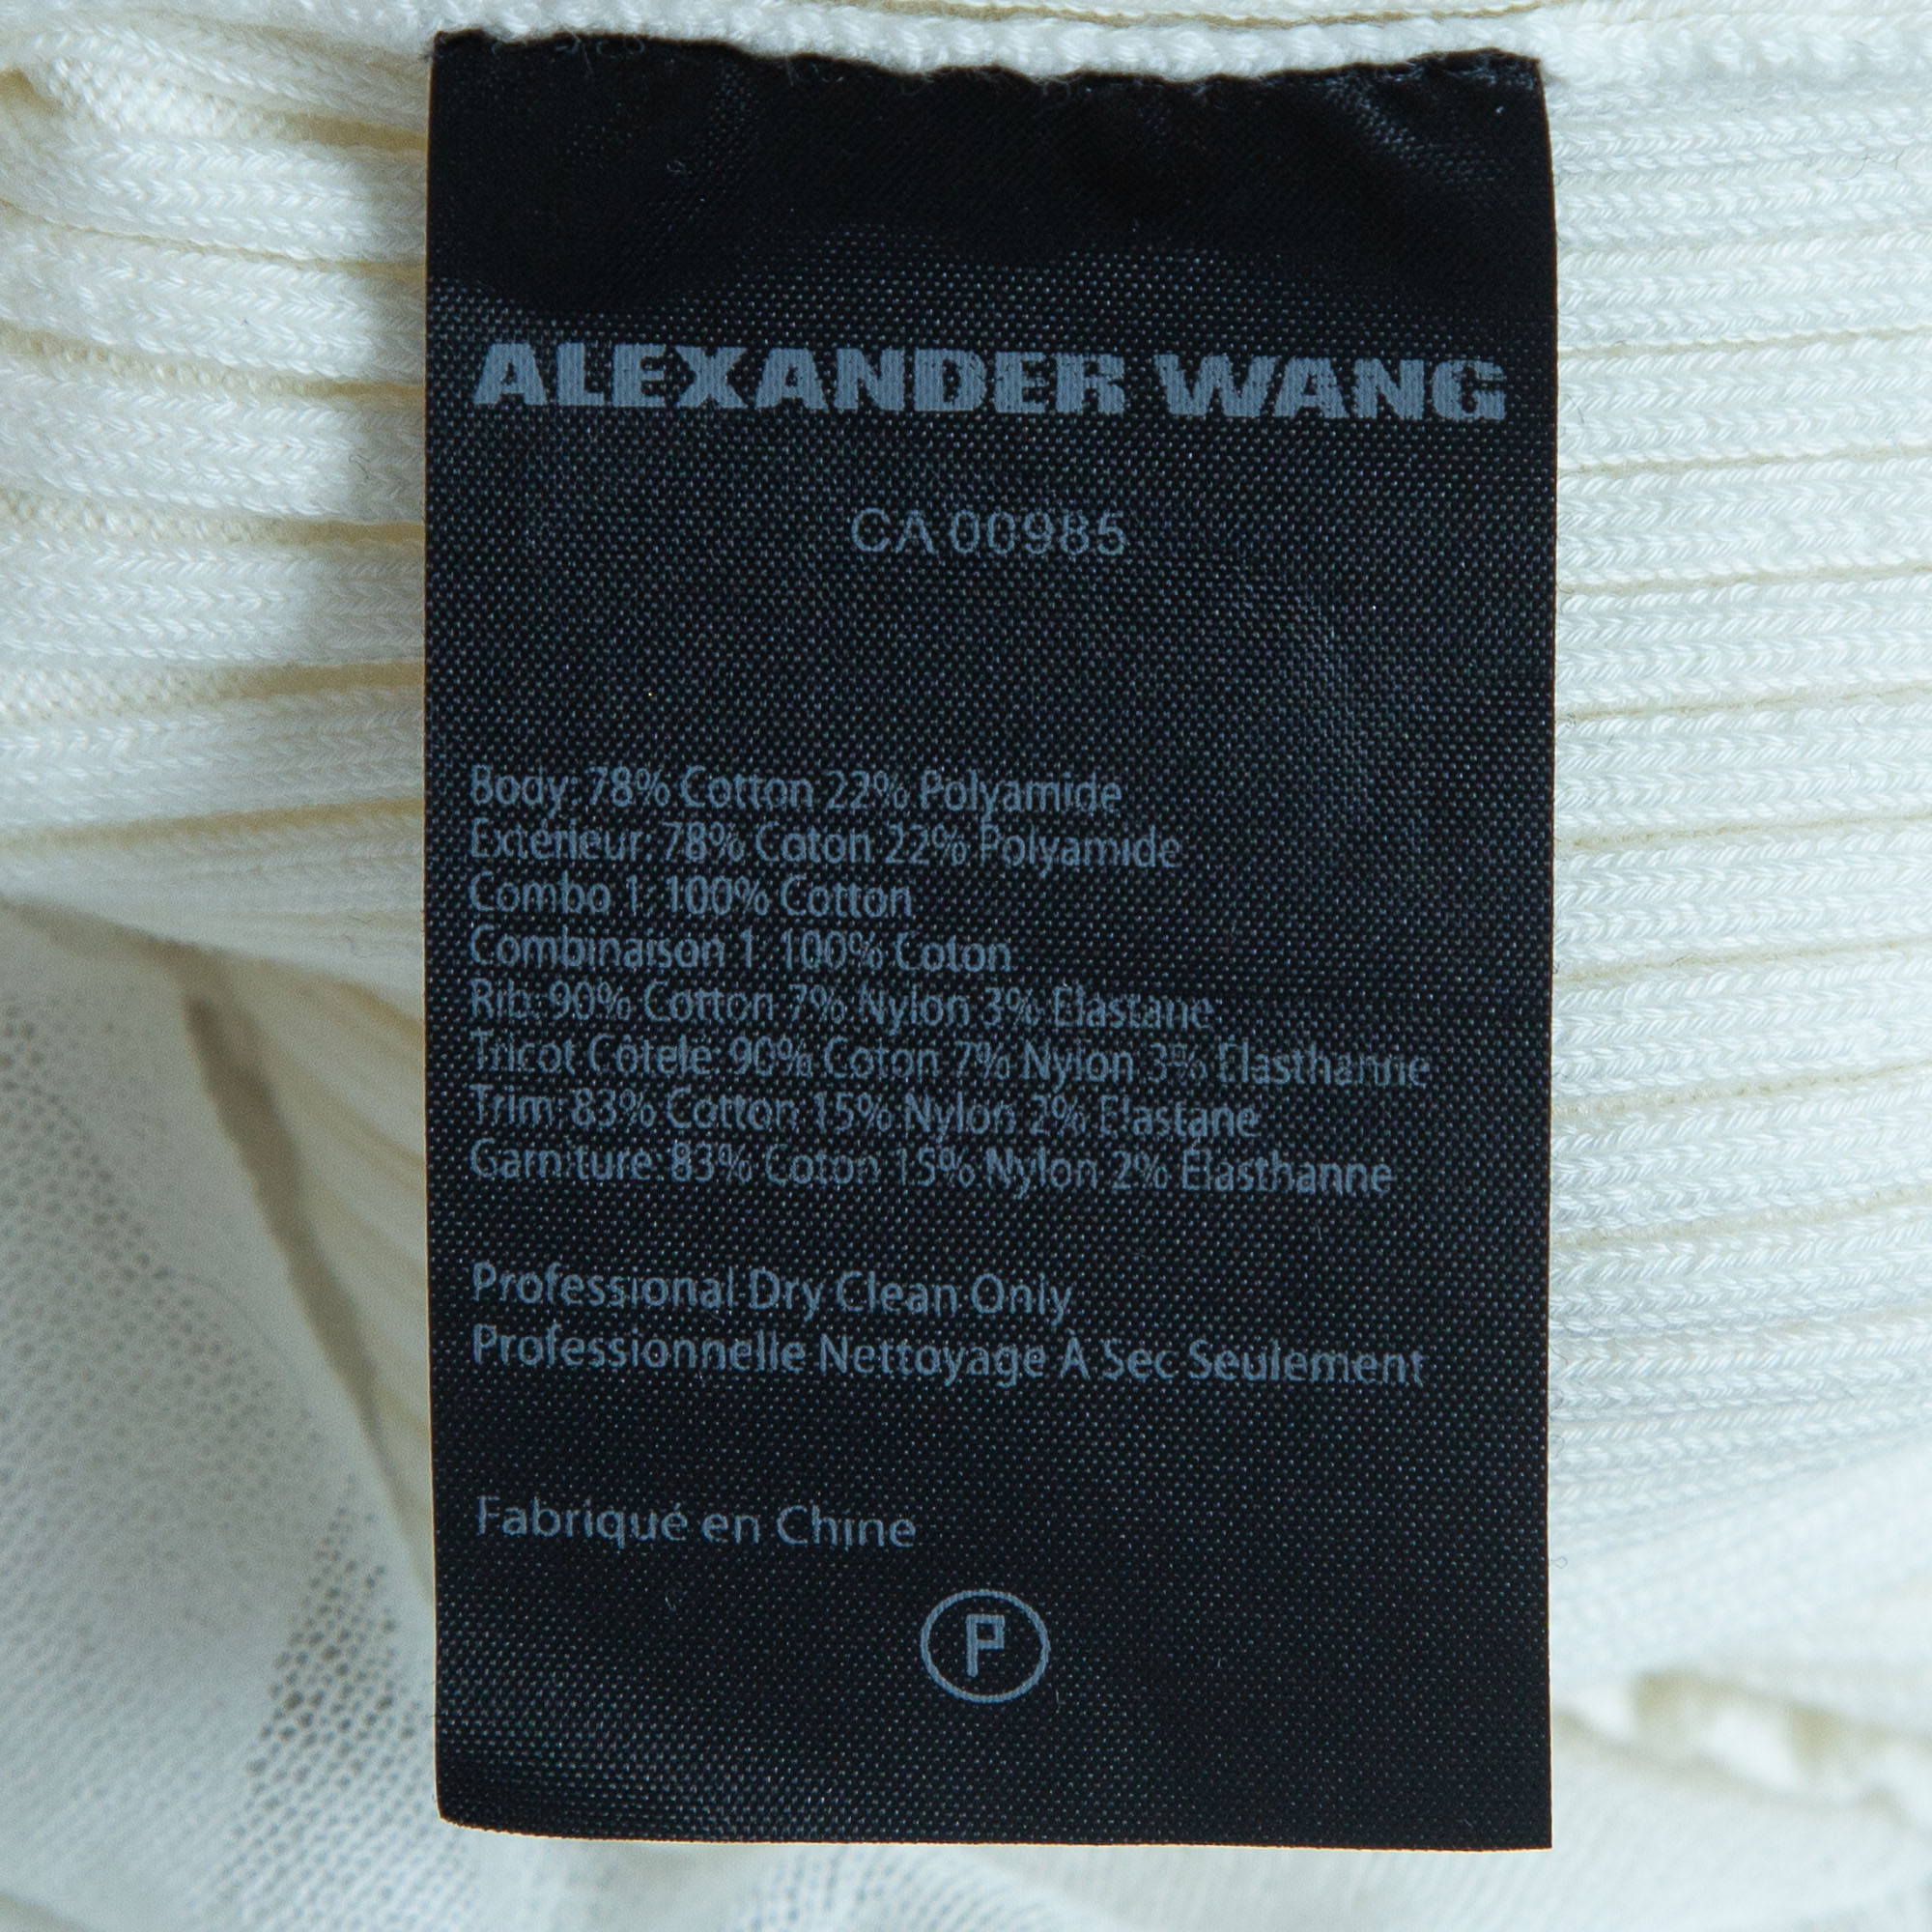 Alexander Wang Off-White Cotton Knit Sheer Overlay Top L